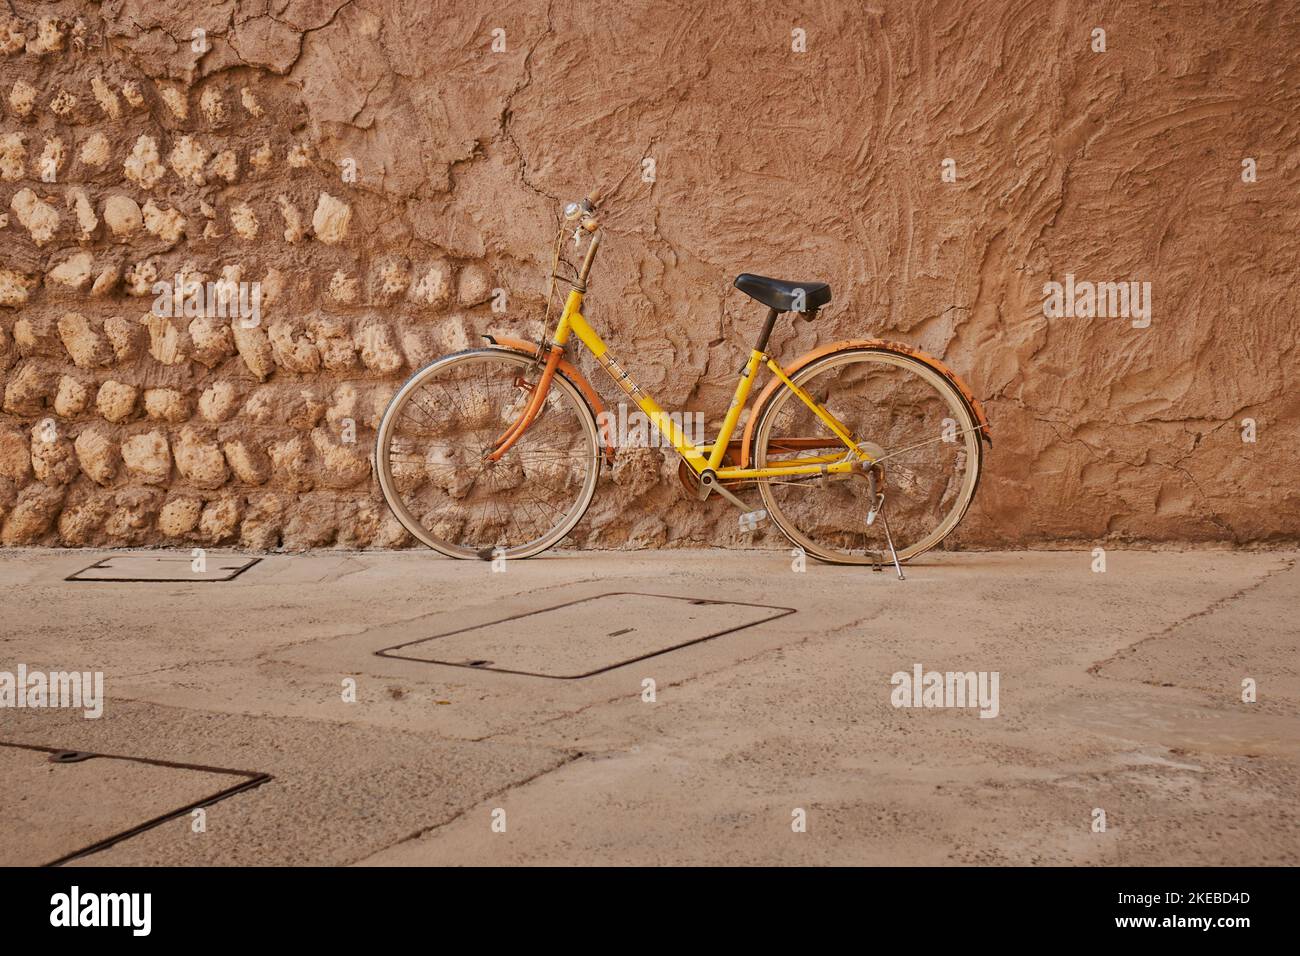 An old Bicycle or bike kept leaning beside earthen wall at Al Seef, Dubai Stock Photo